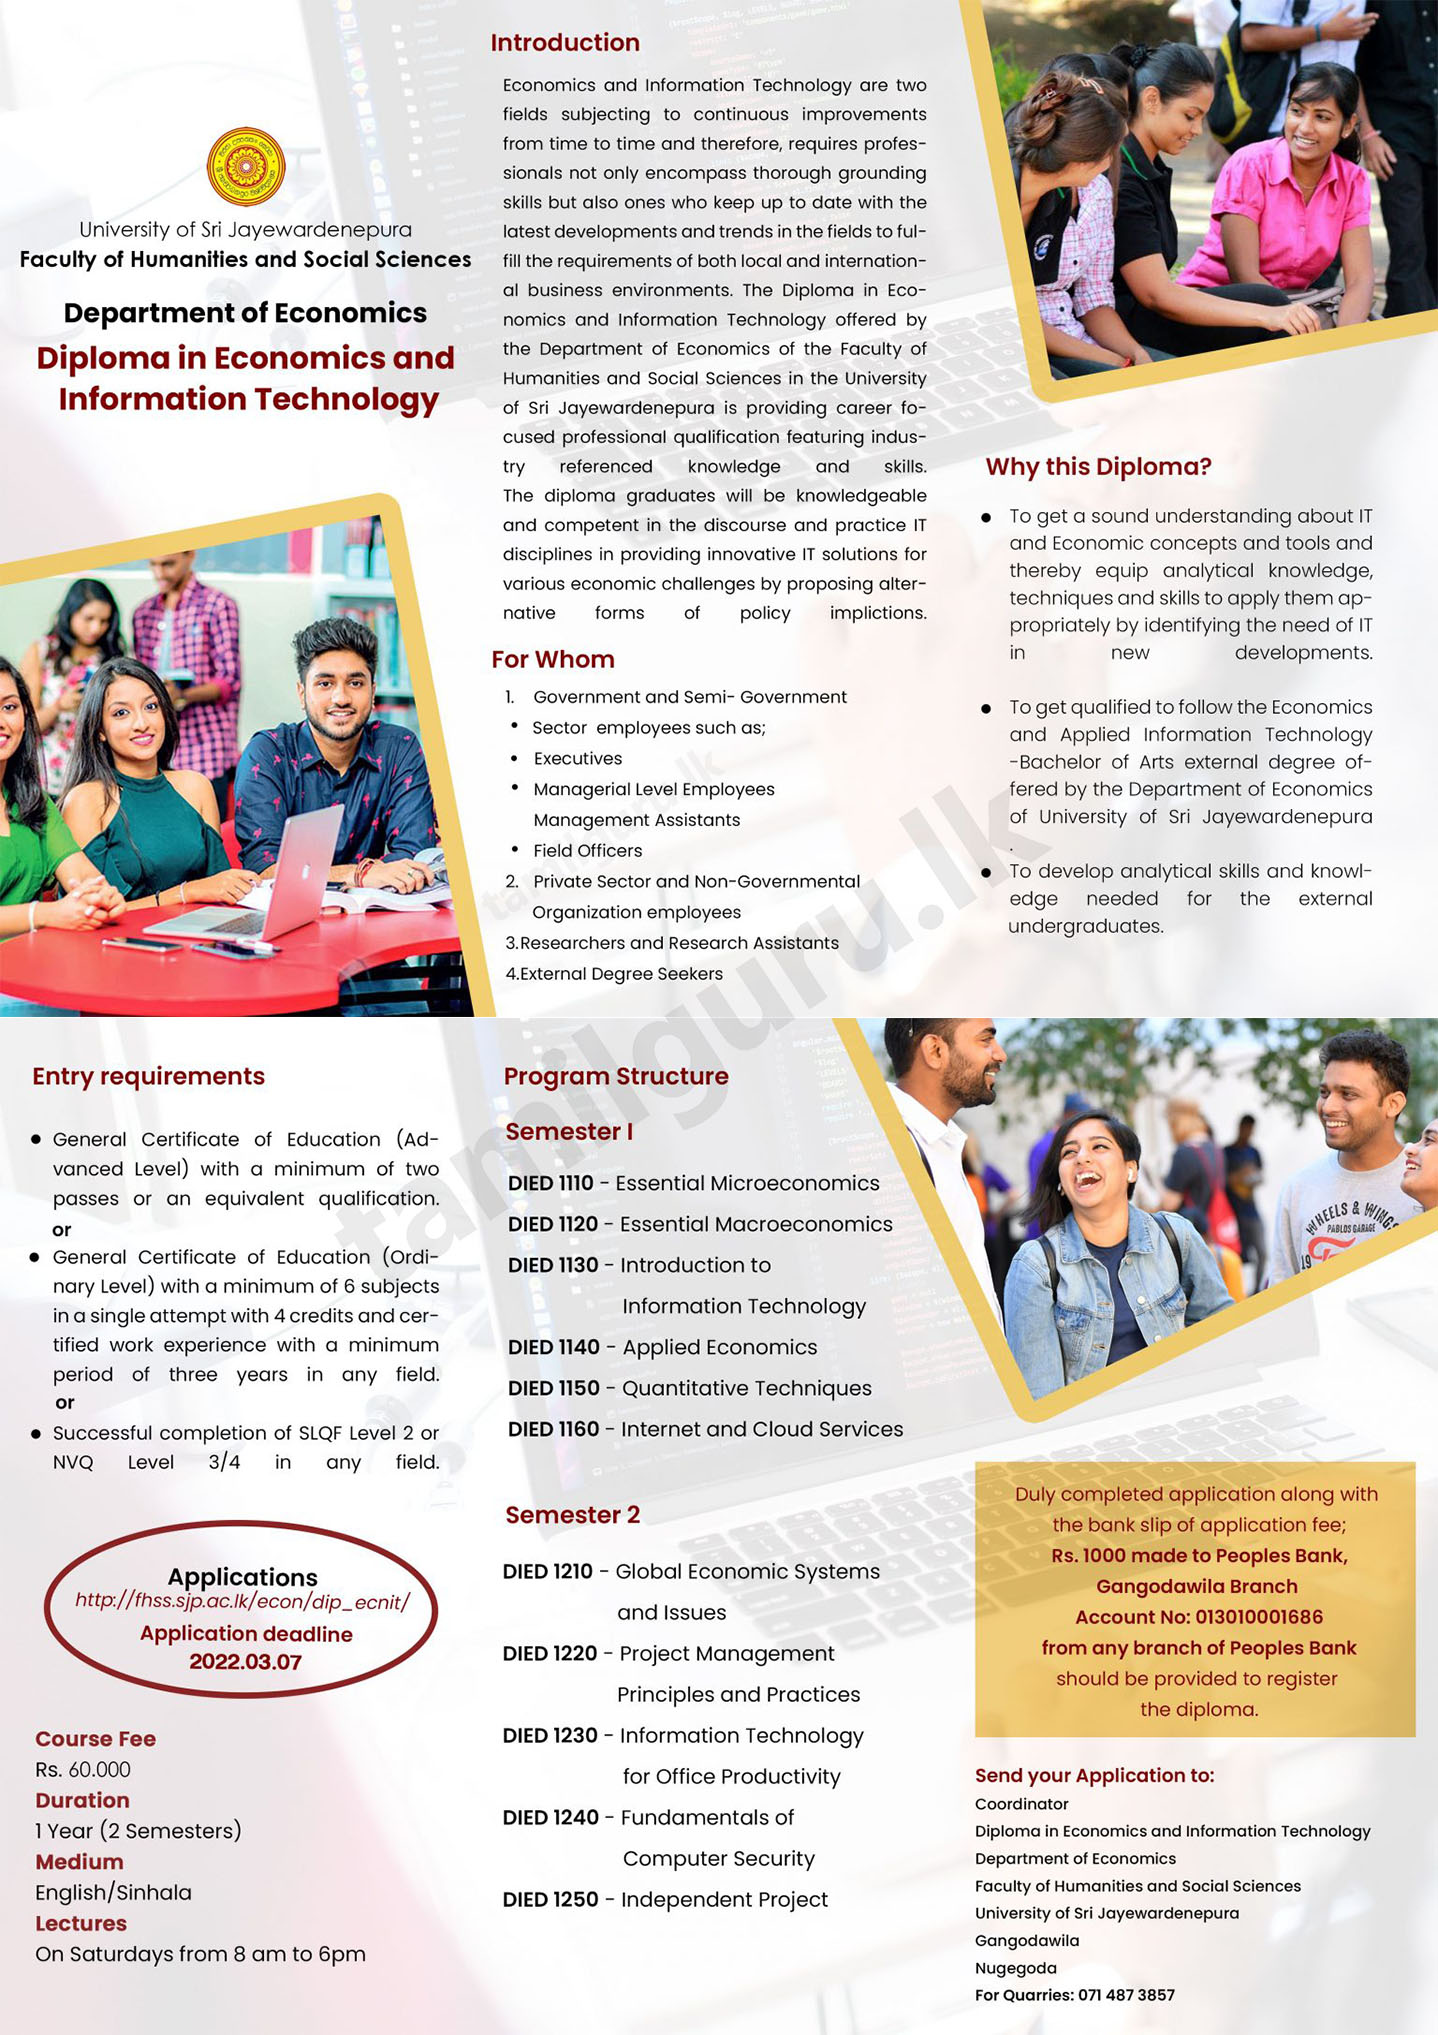 Calling Applications for Diploma in Economics and Information Technology Course - (2022) Conducted by the University of Sri Jayewardenepura - English Notice